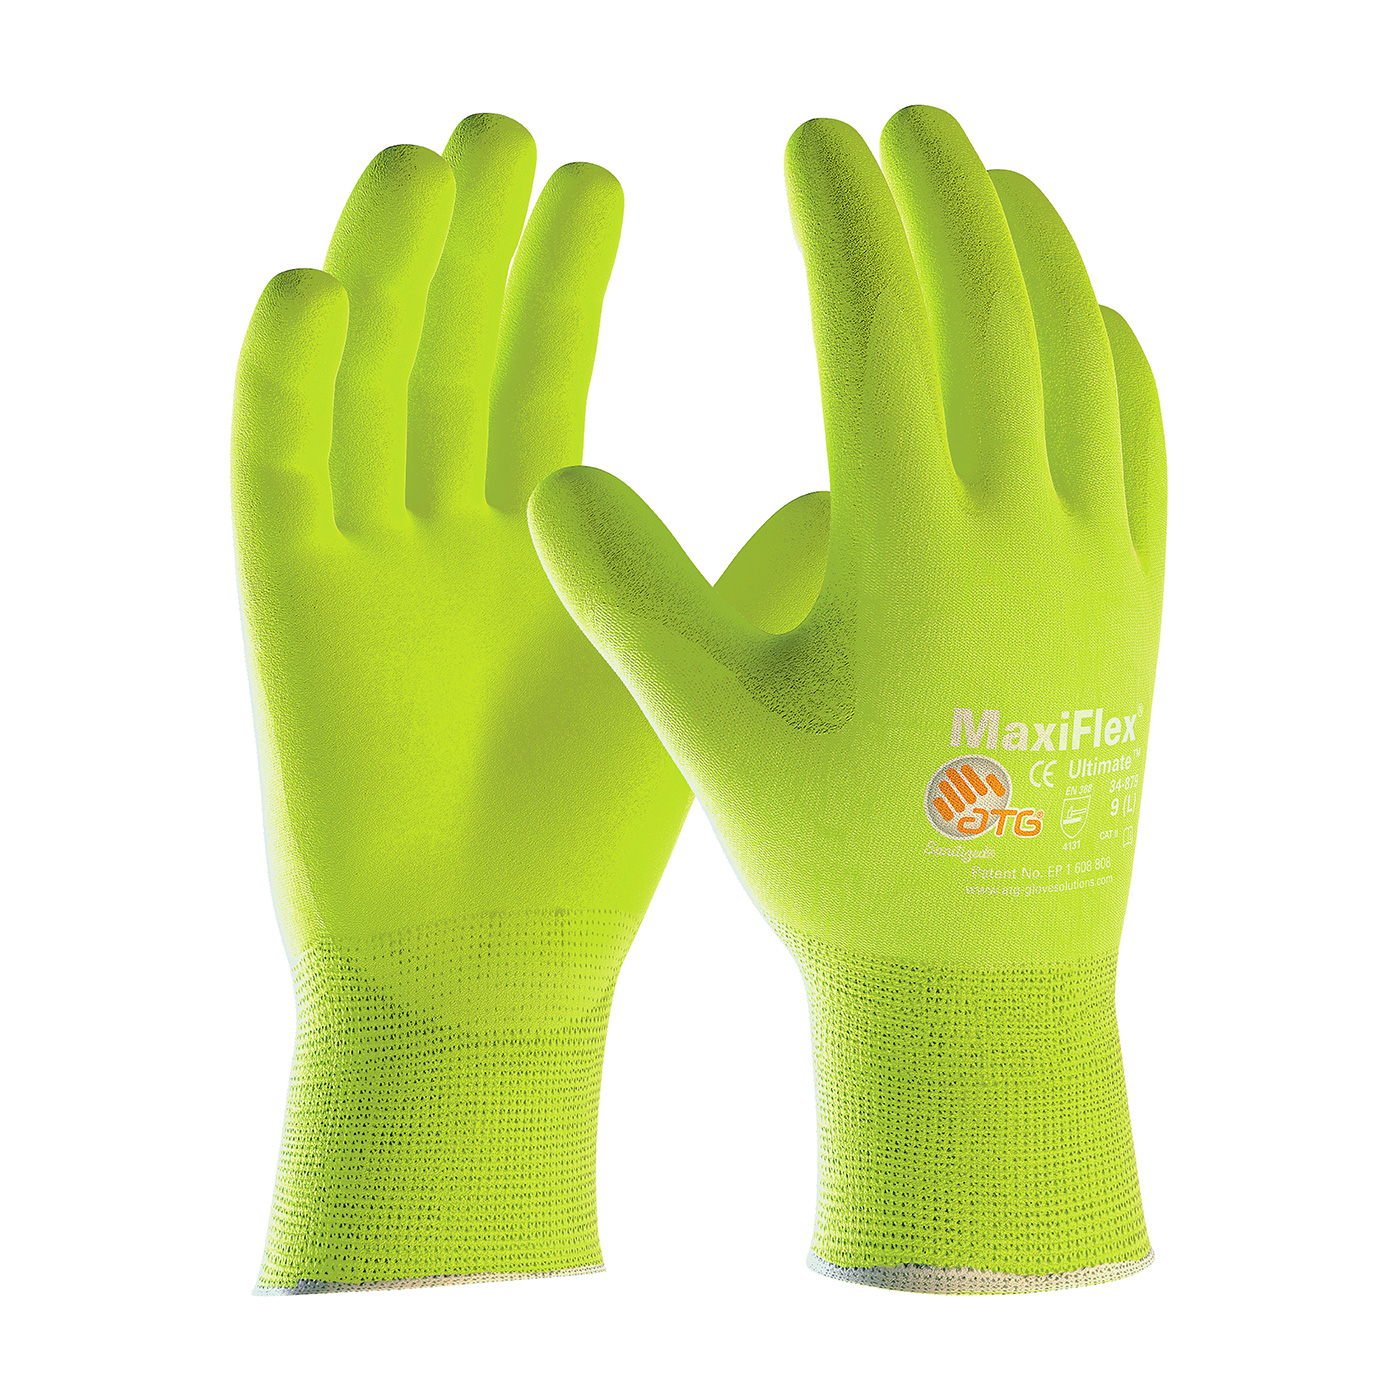 PIP 34-874FY/L MaxiFlex Ultimate Hi-Vis Seamless Knit Nylon/Lycra Glove with Nitrile Coated MicroFoam Grip on Palm & Fingers - Large PID-34 874FY L